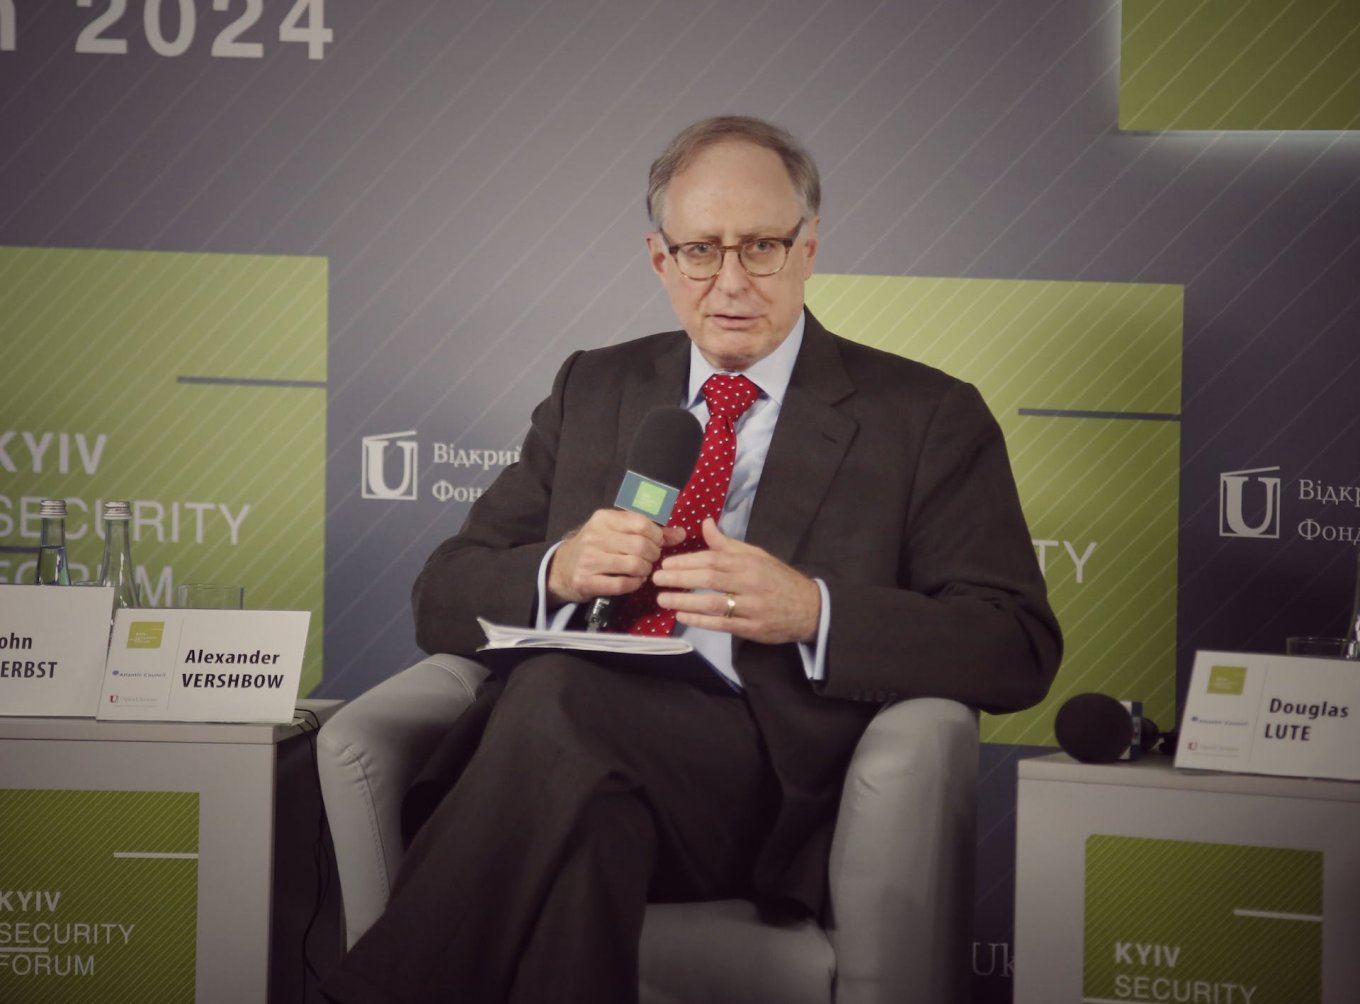 Amb. Alexander Vershbow, NATO Deputy Secretary General in 2012-2016, United States Ambassador to NATO in 1998-2001 Defense Express Former NATO Officials: Ukraine Is Unlikely to Join NATO in 2024